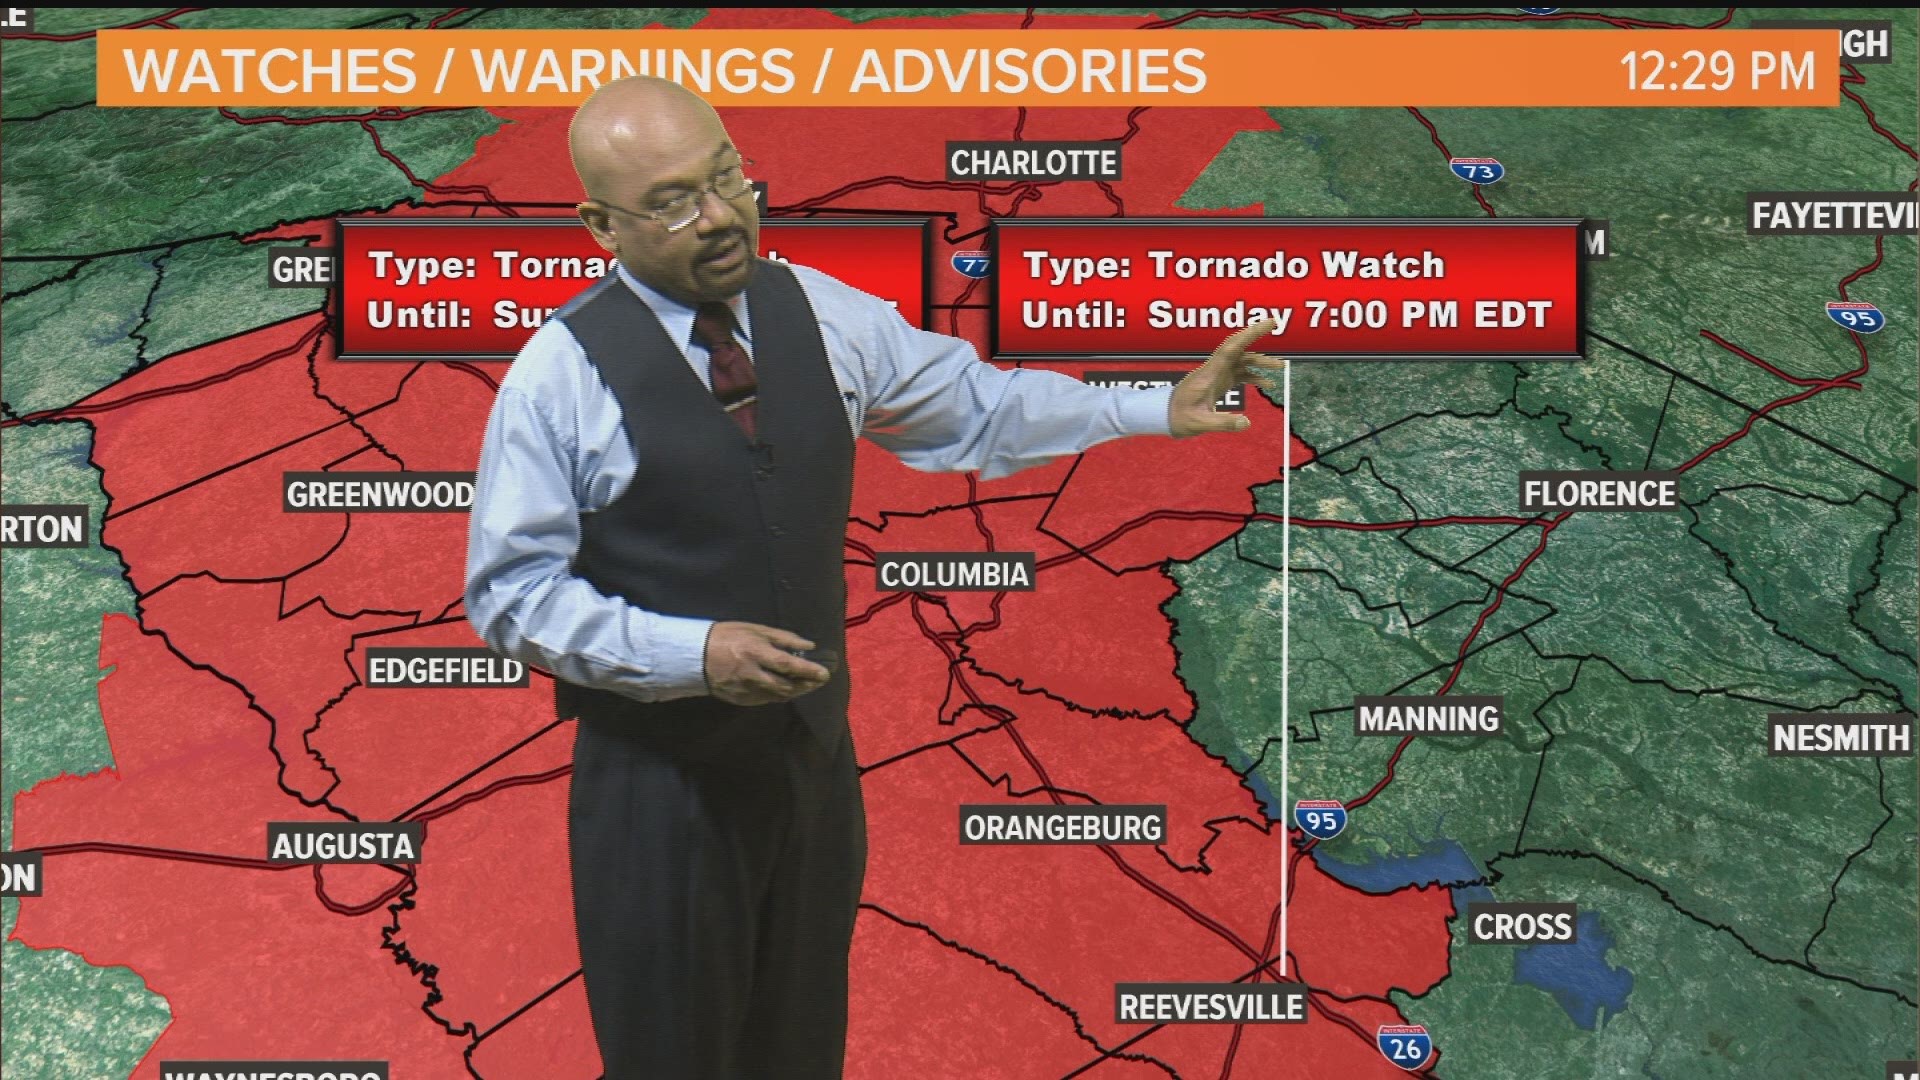 Tornado watch until 7 PM. Covering Lee Sumter and Clarendon counties are not within the watch.